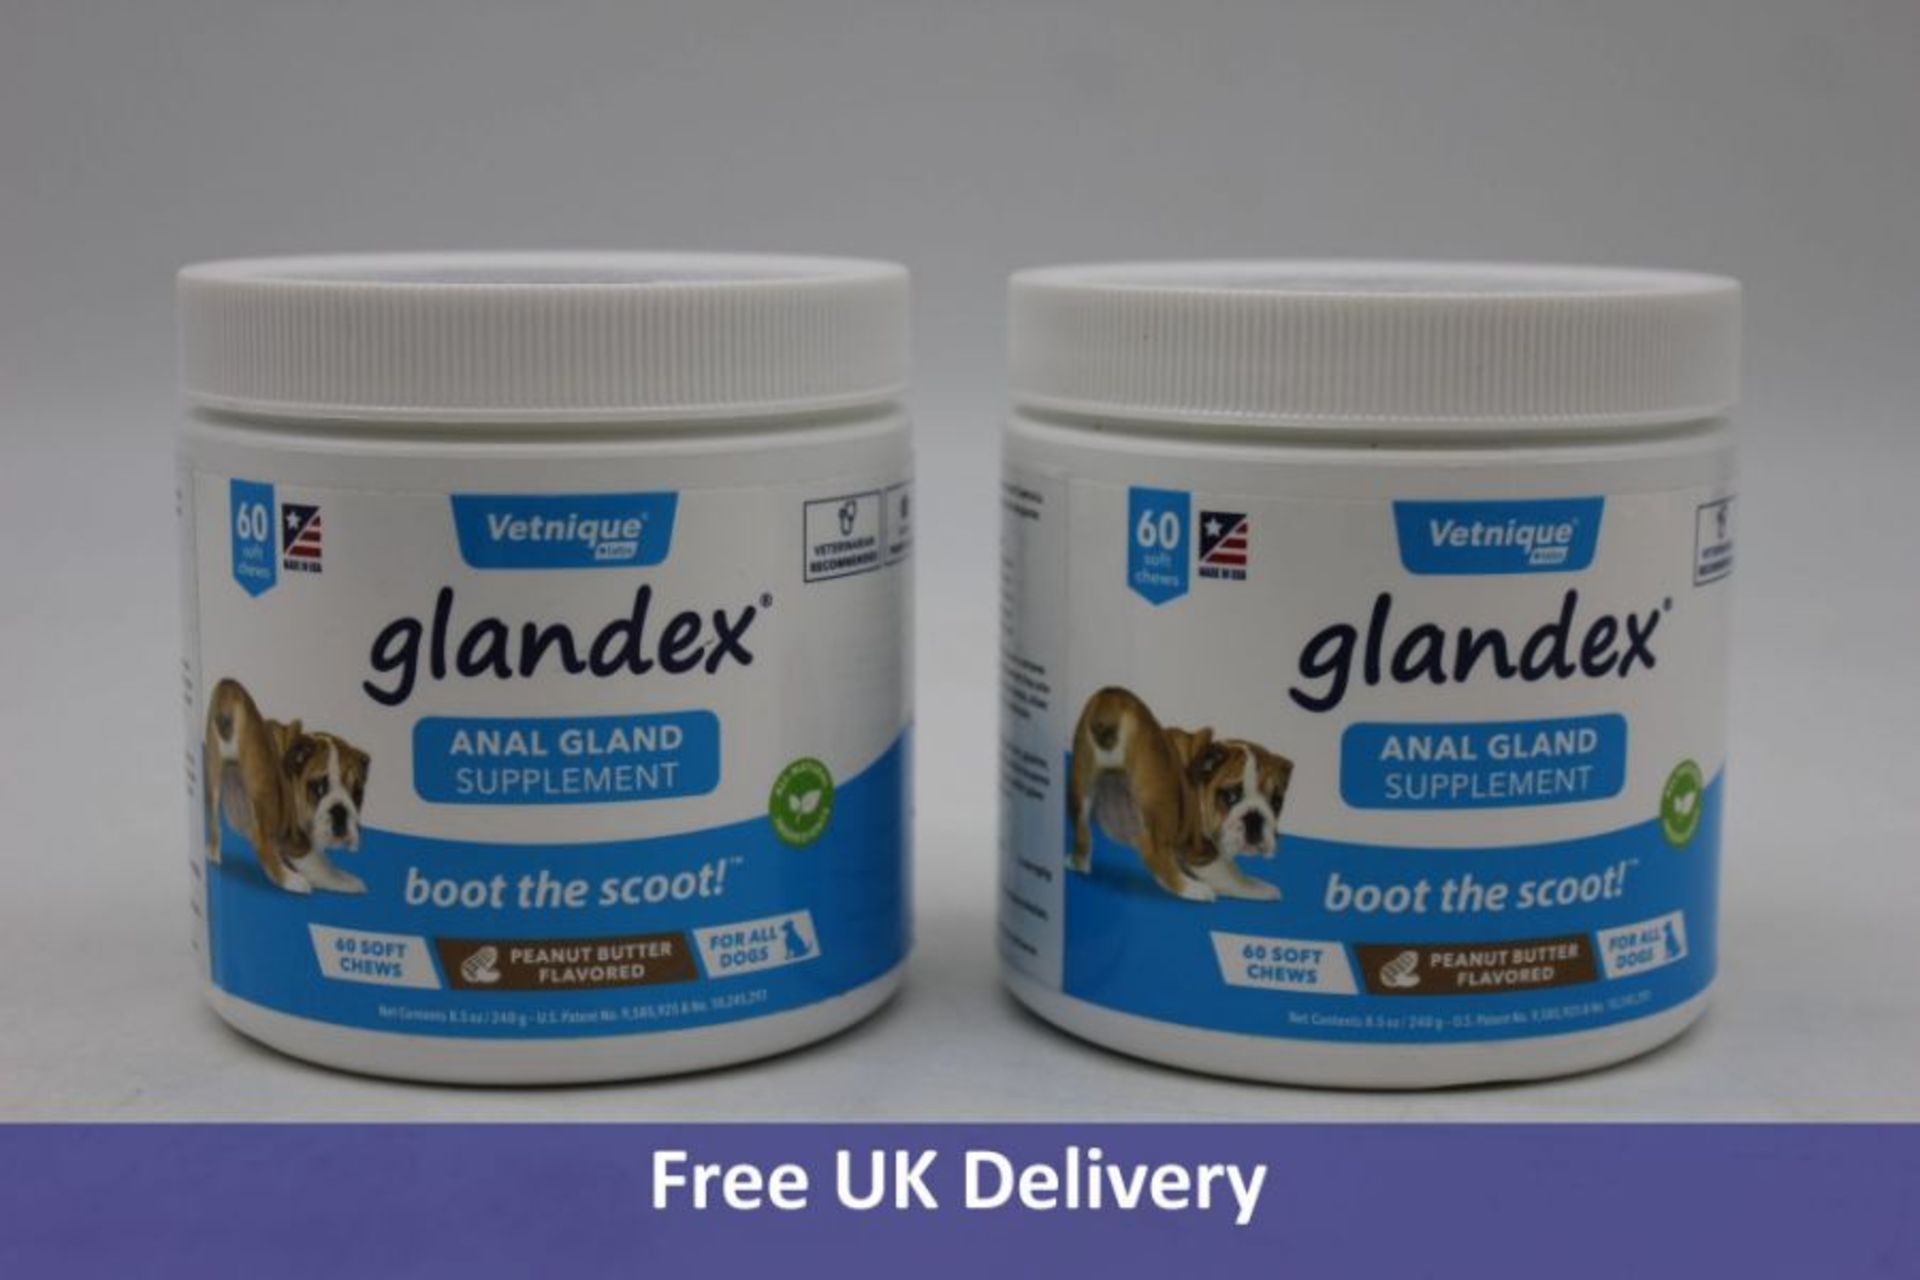 Eight Tubs of Vetnique Glandex Anal Gland Supplement, 60 Soft Chews Per Tub, Peanut Butter Flavoured - Image 2 of 2